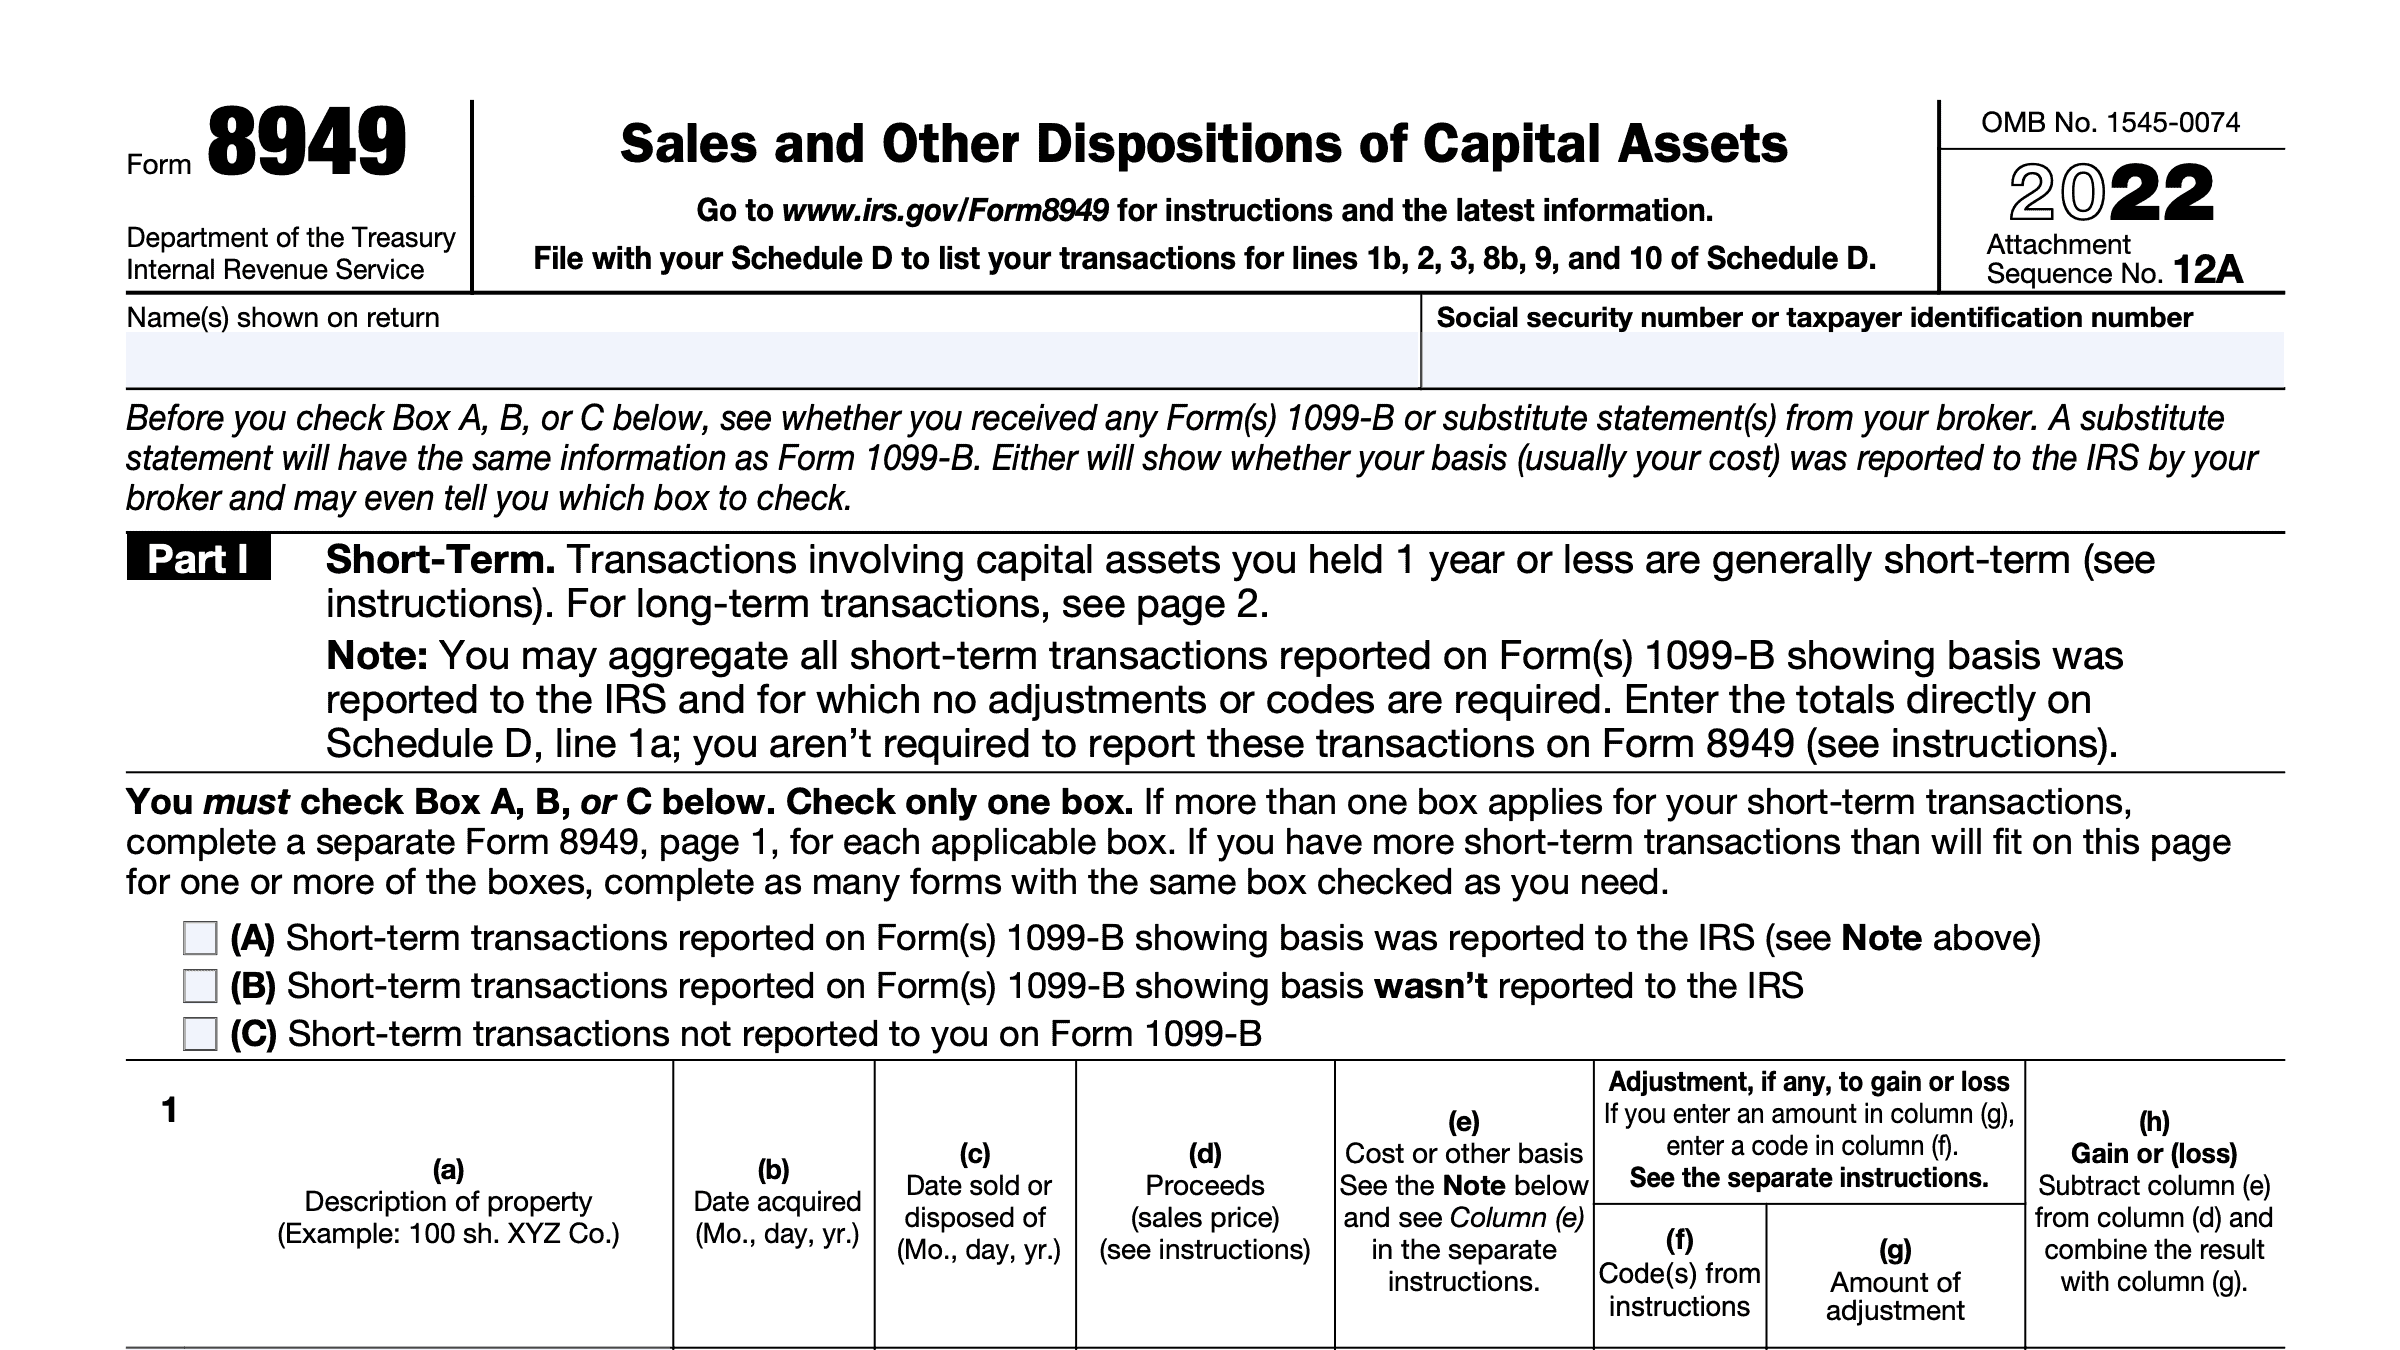 irs-form-8949-instructions-sales-dispositions-of-capital-assets